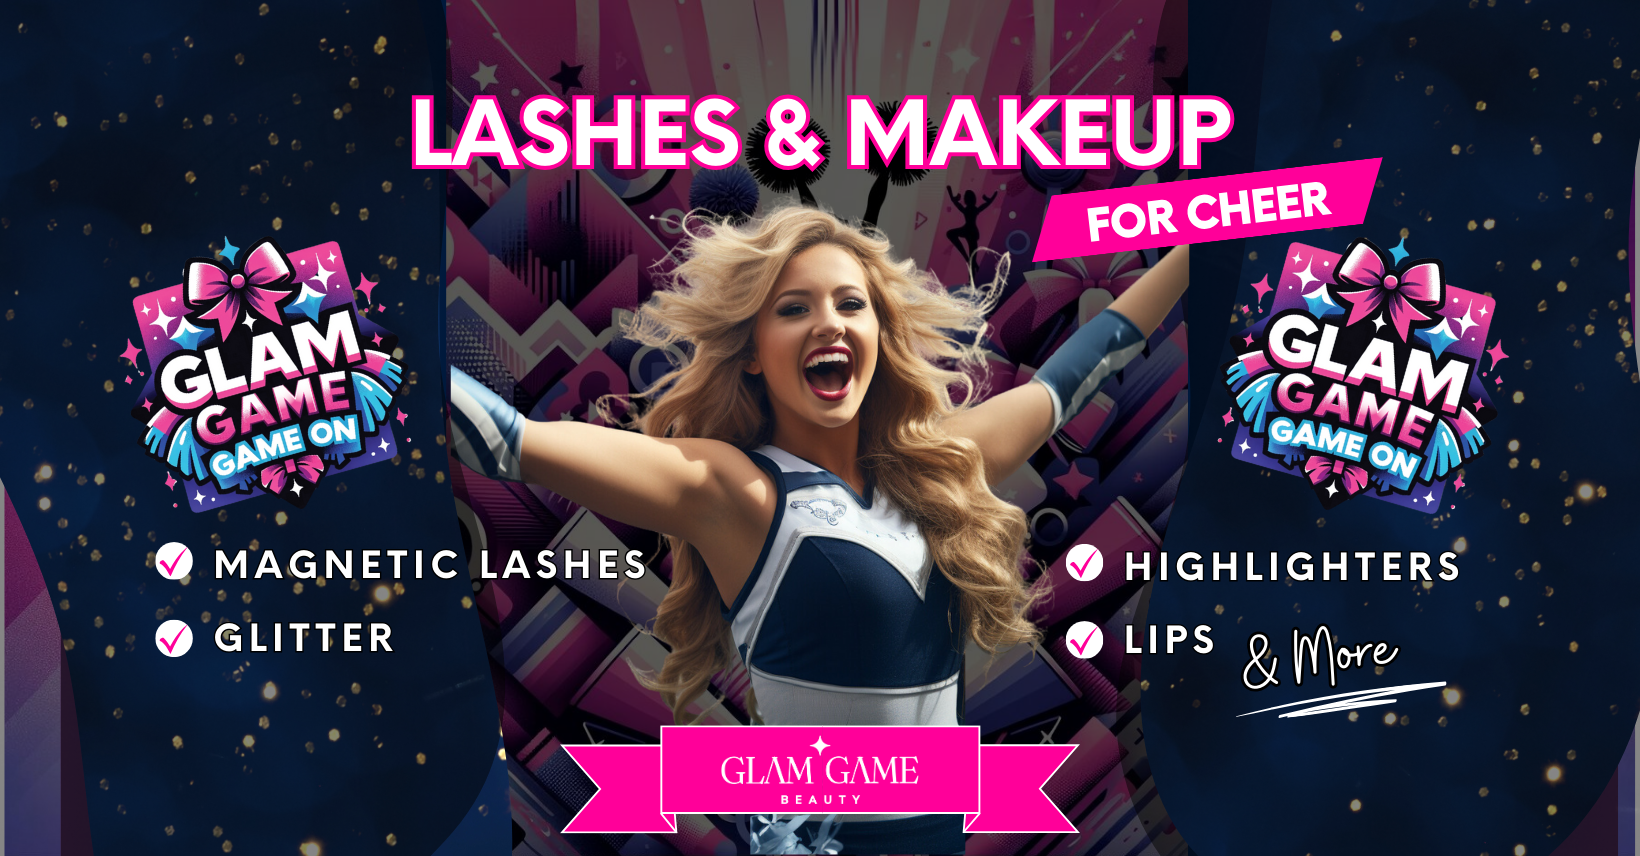 Cheer Loud, Cheer Proud -Glam Game's Ultimate Cheer Makeup Collection